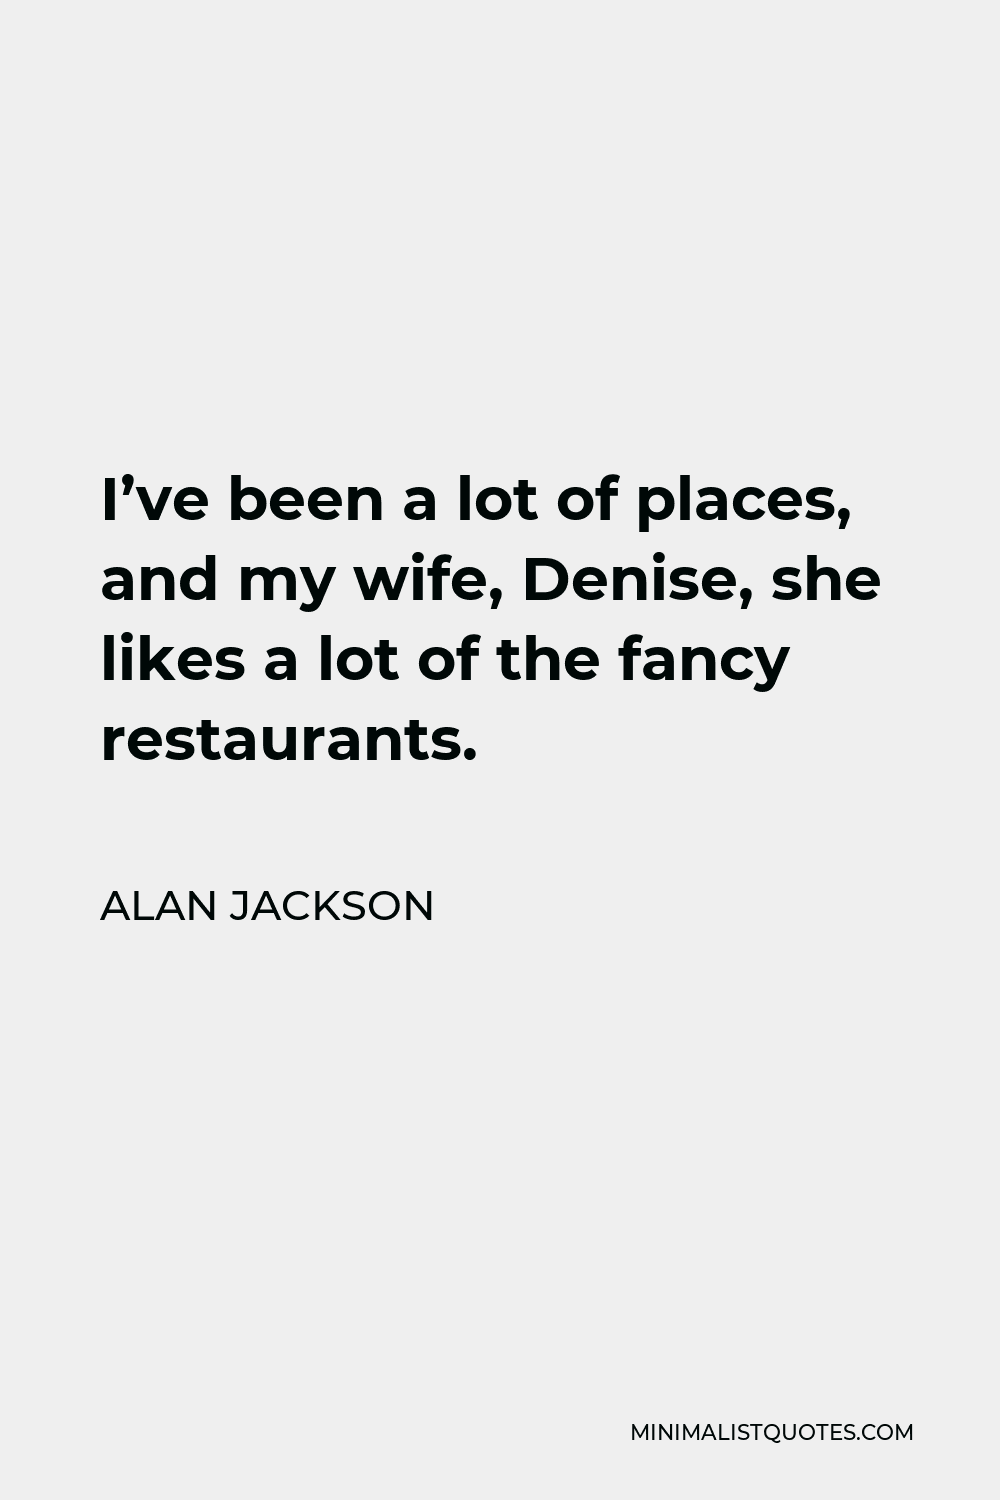 Alan Jackson Quote - I’ve been a lot of places, and my wife, Denise, she likes a lot of the fancy restaurants.